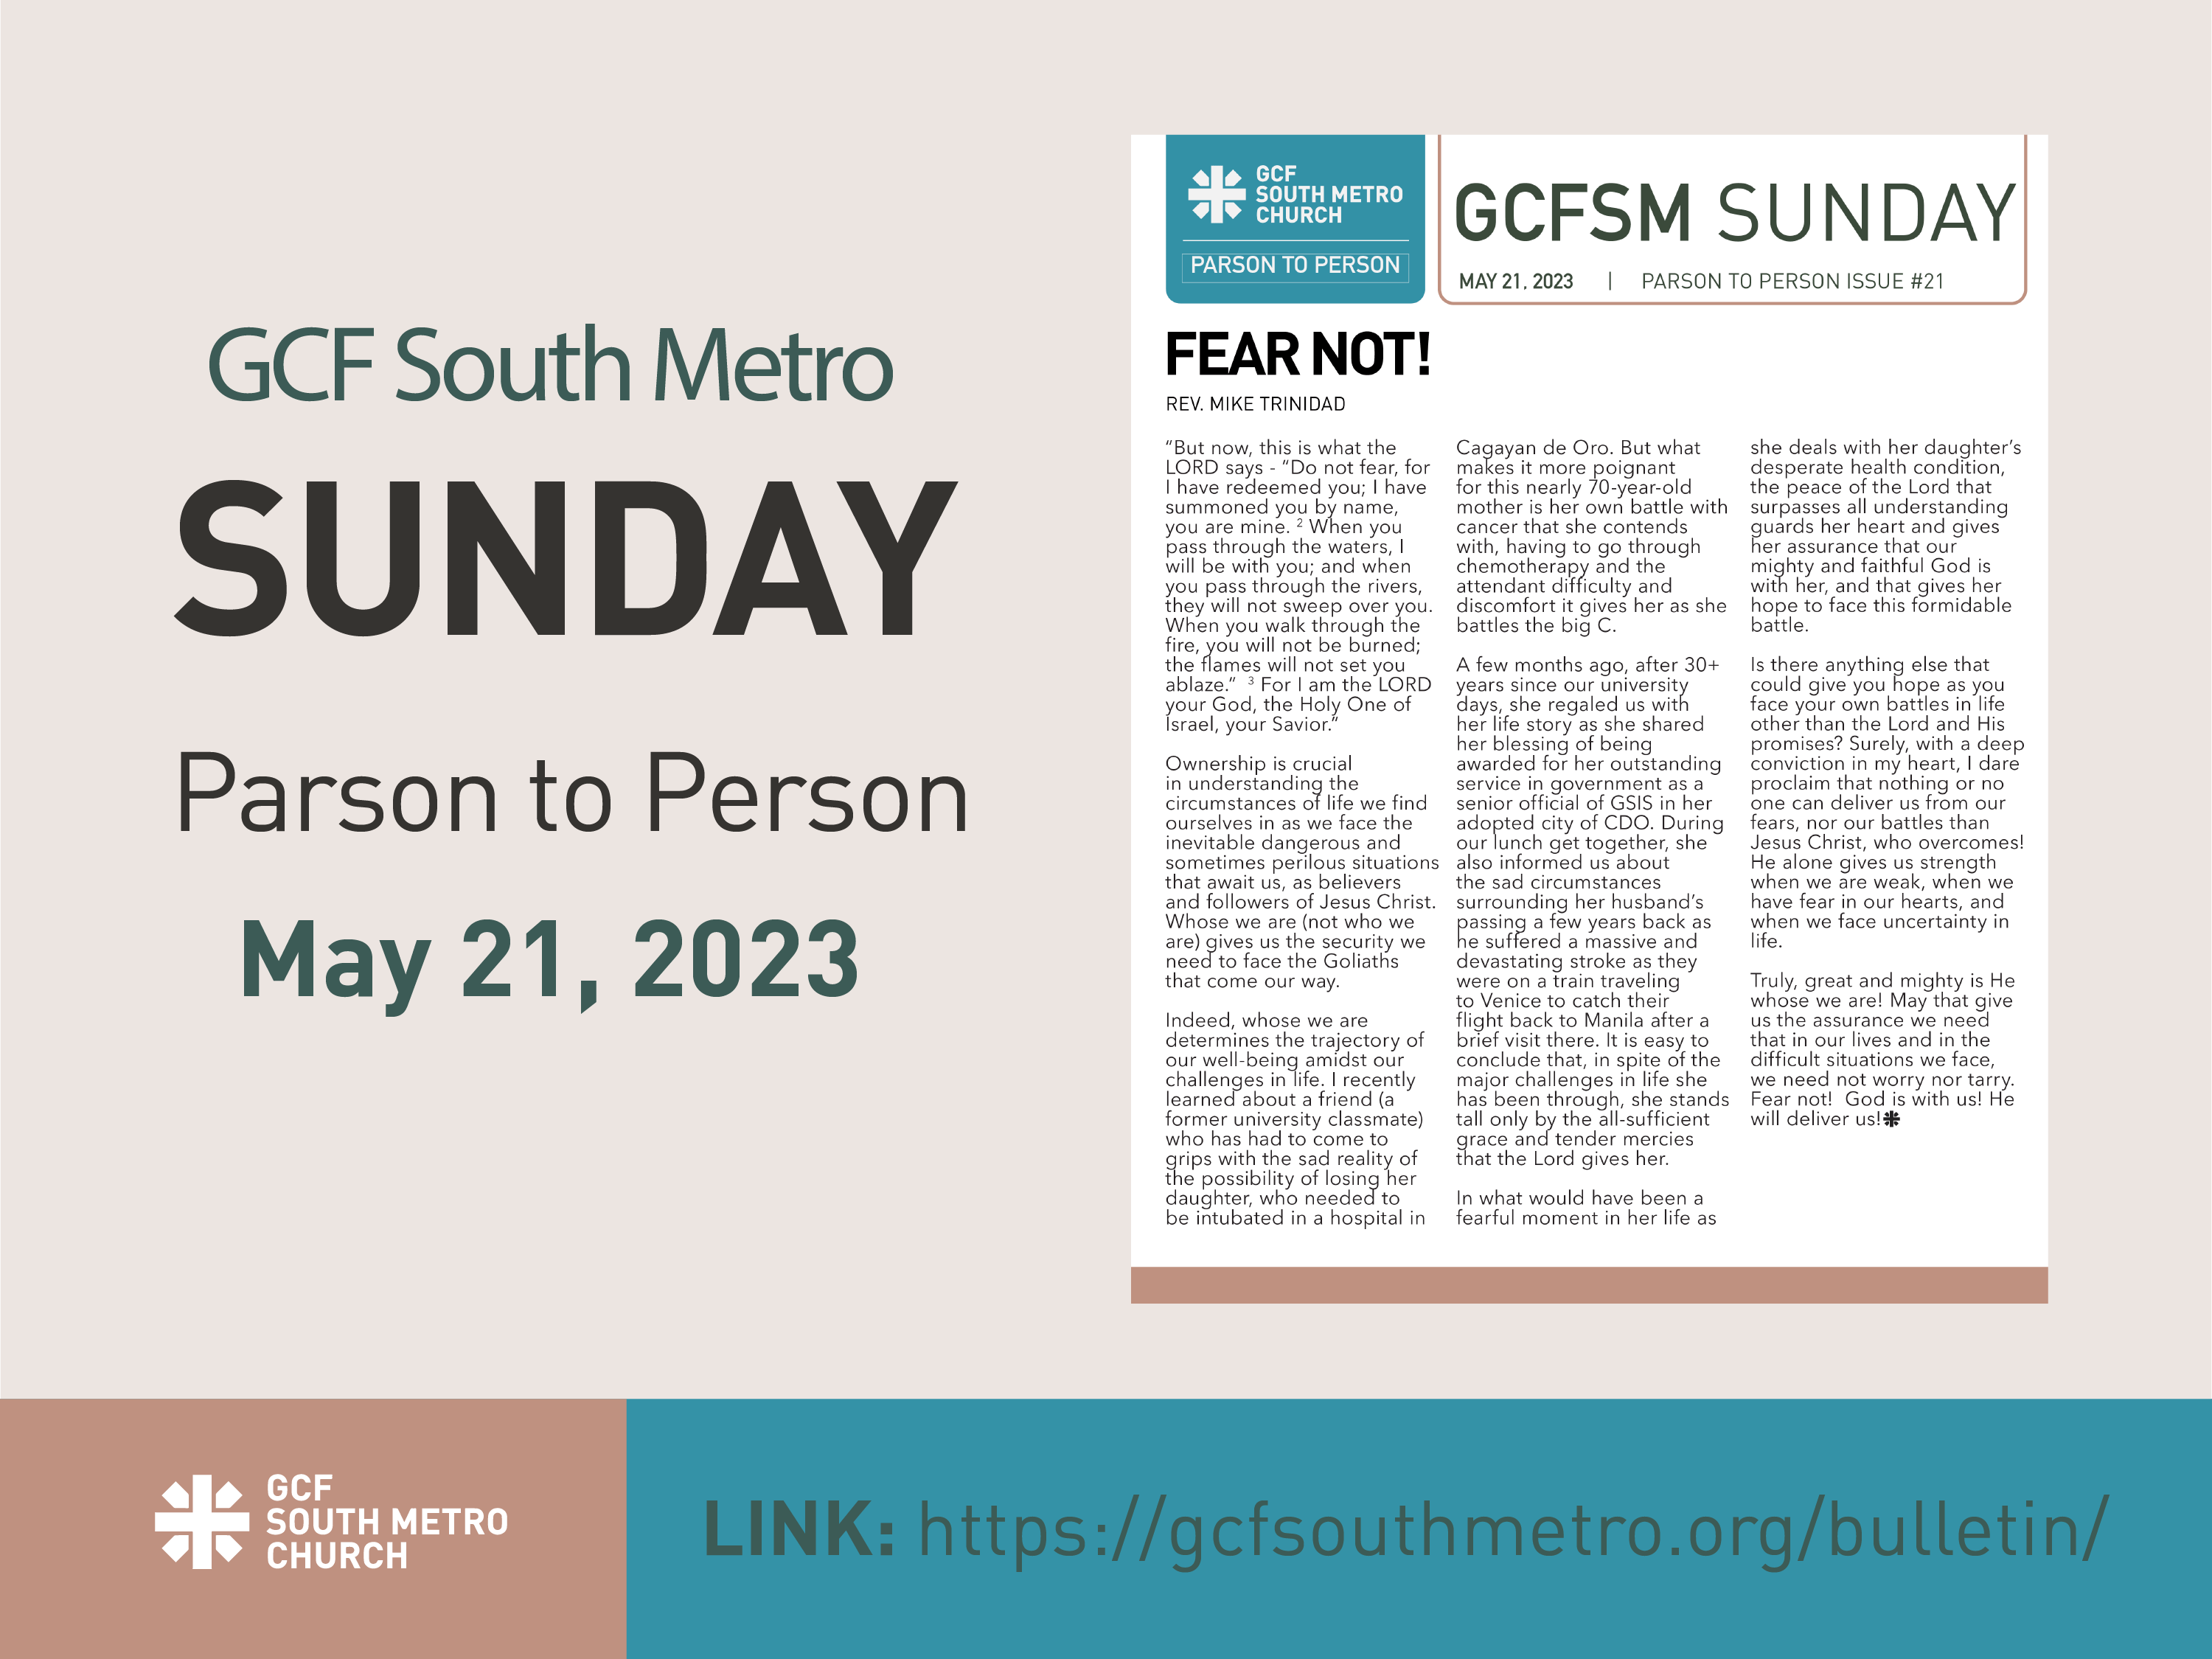 Sunday Bulletin – Parson to Person, May 21, 2023